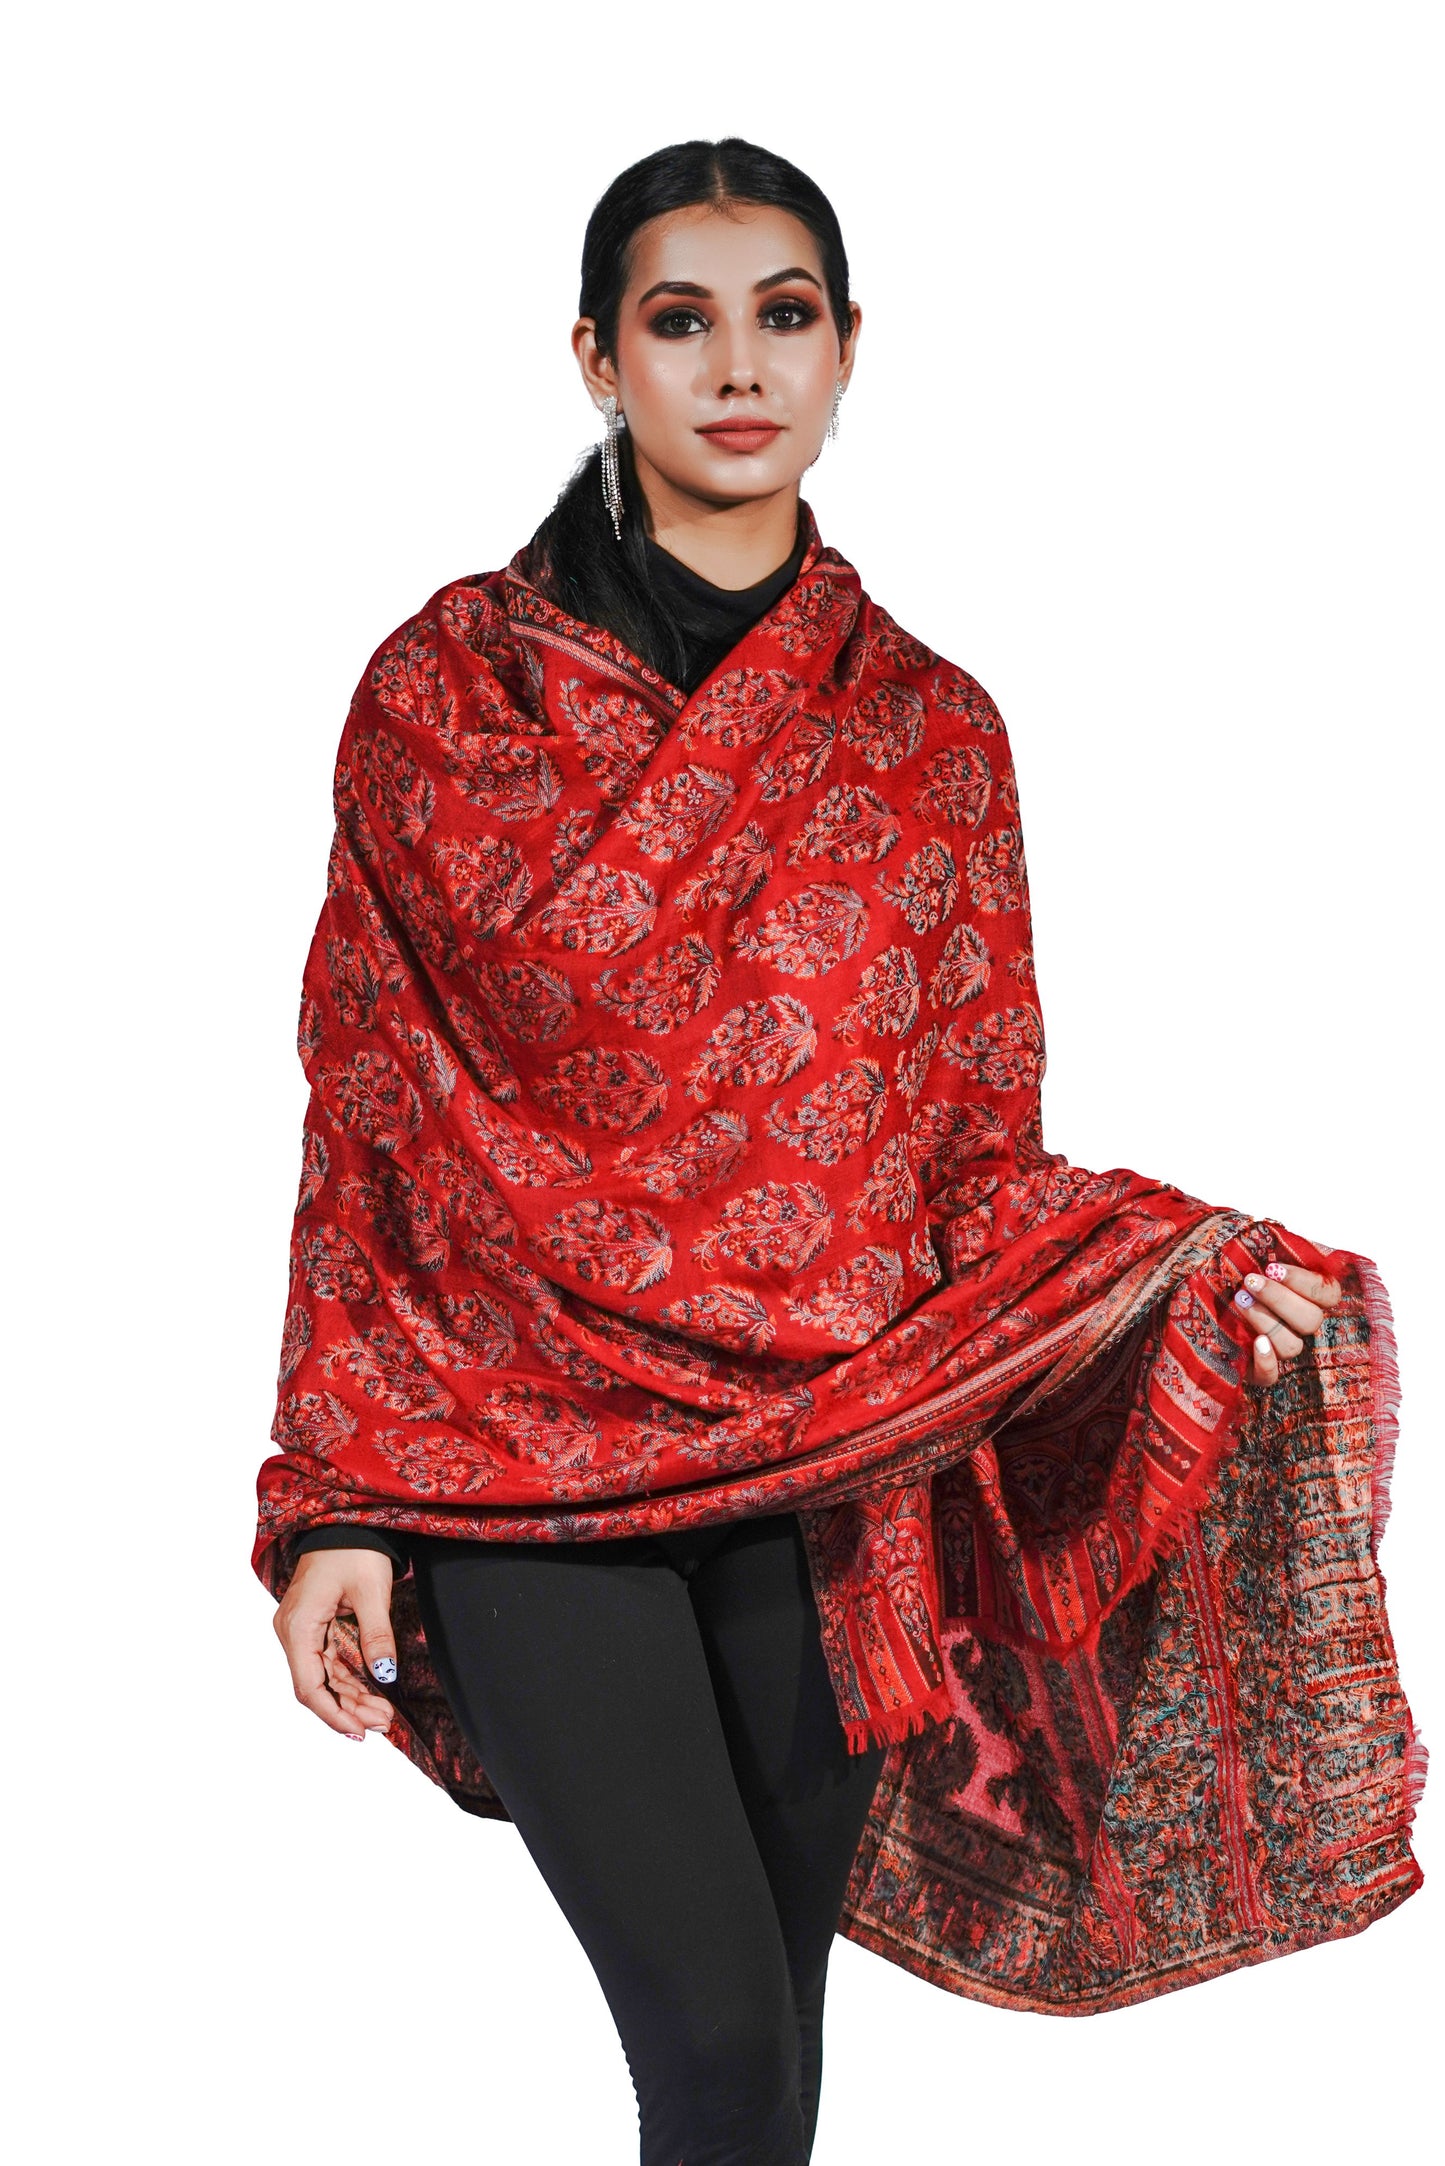 Women's Wool Blend Antique Shawl with Booti Design - Ruby Red